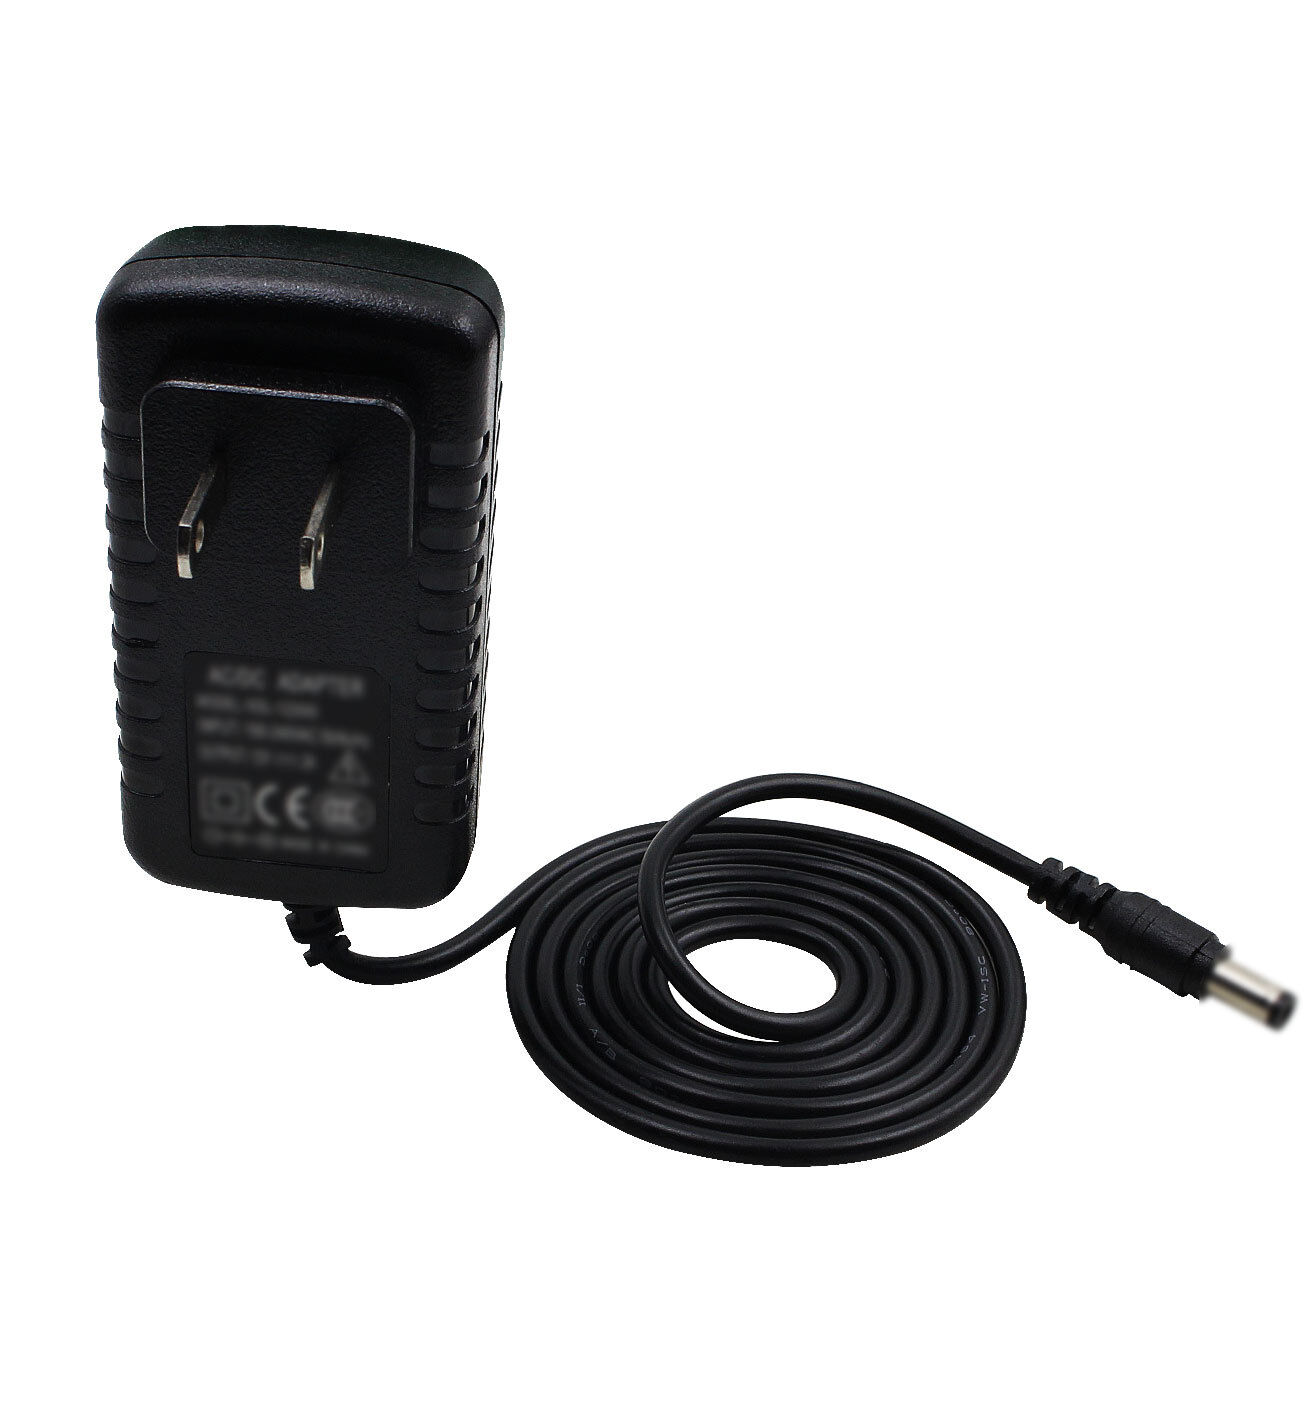 *Brand NEW*Delphi SA10109 XM Roady 2 Personal Audio System 5 V AC Adapter Cord Power Supply